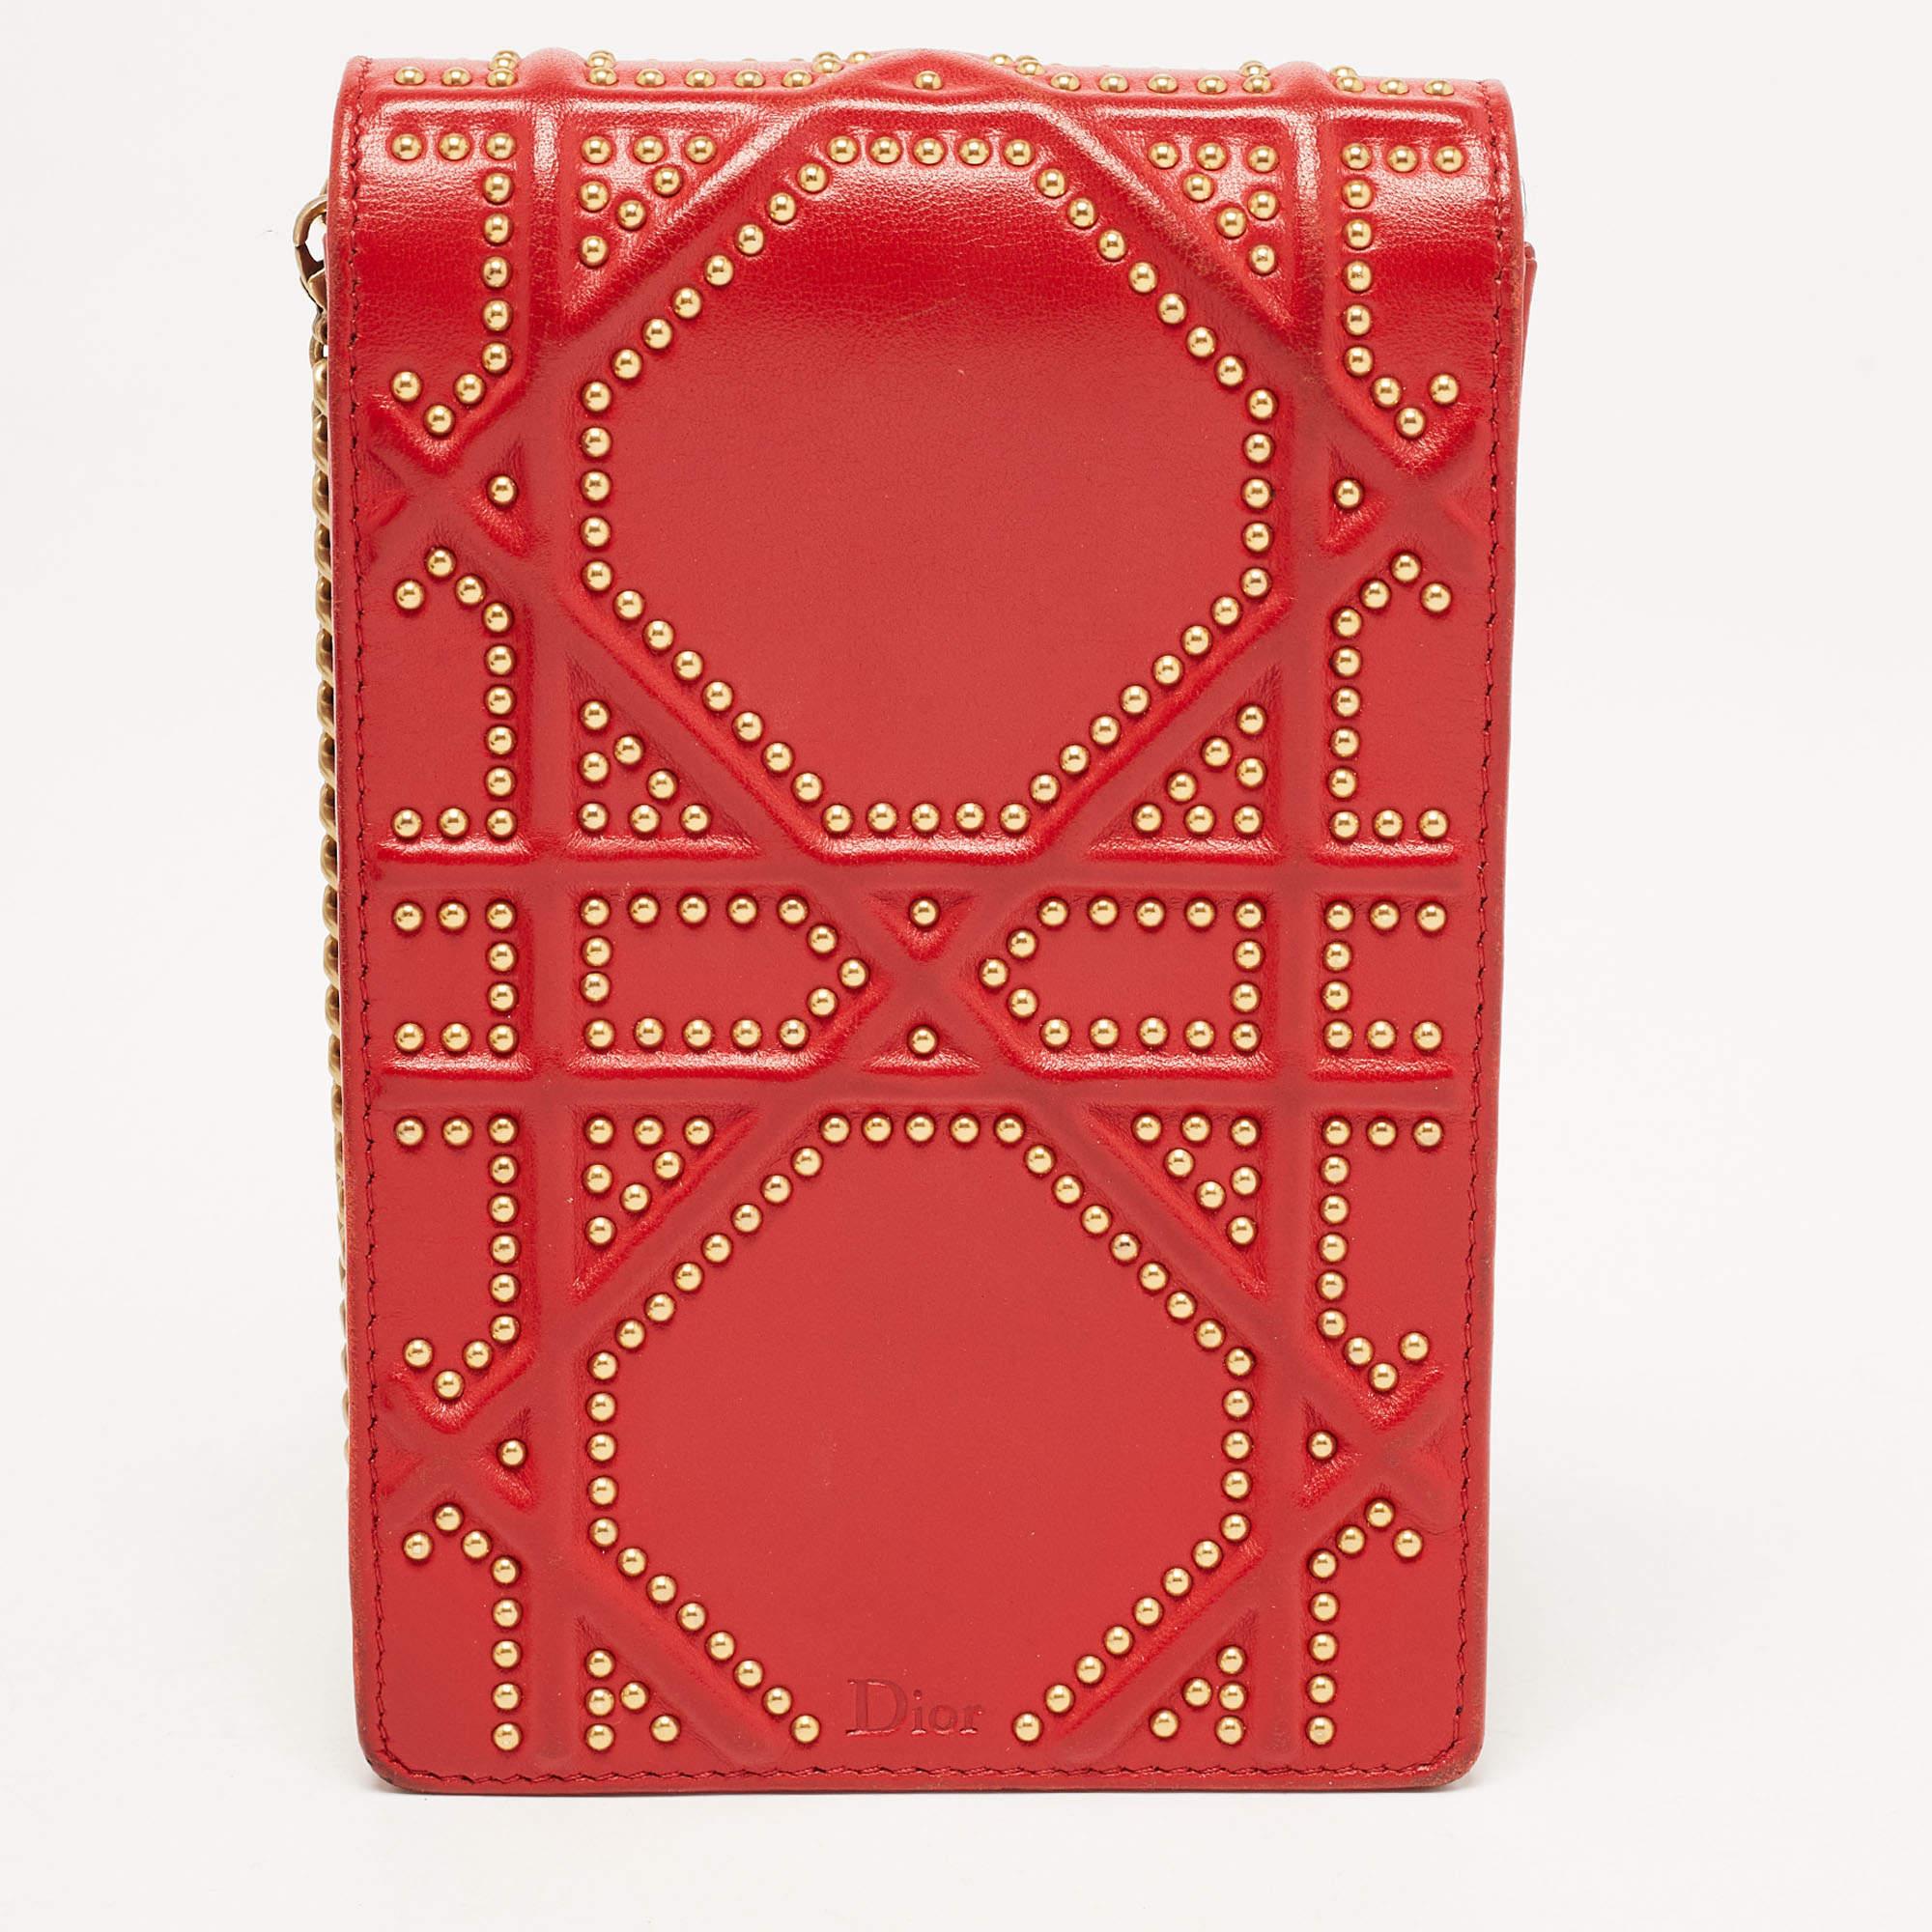 This Diorama clutch is so adorable! It has been crafted from red leather and detailed with studs in the brand's Cannage pattern. The signature crest sits on the flap securing two compartments while a shoulder chain is provided for you to carry it.

